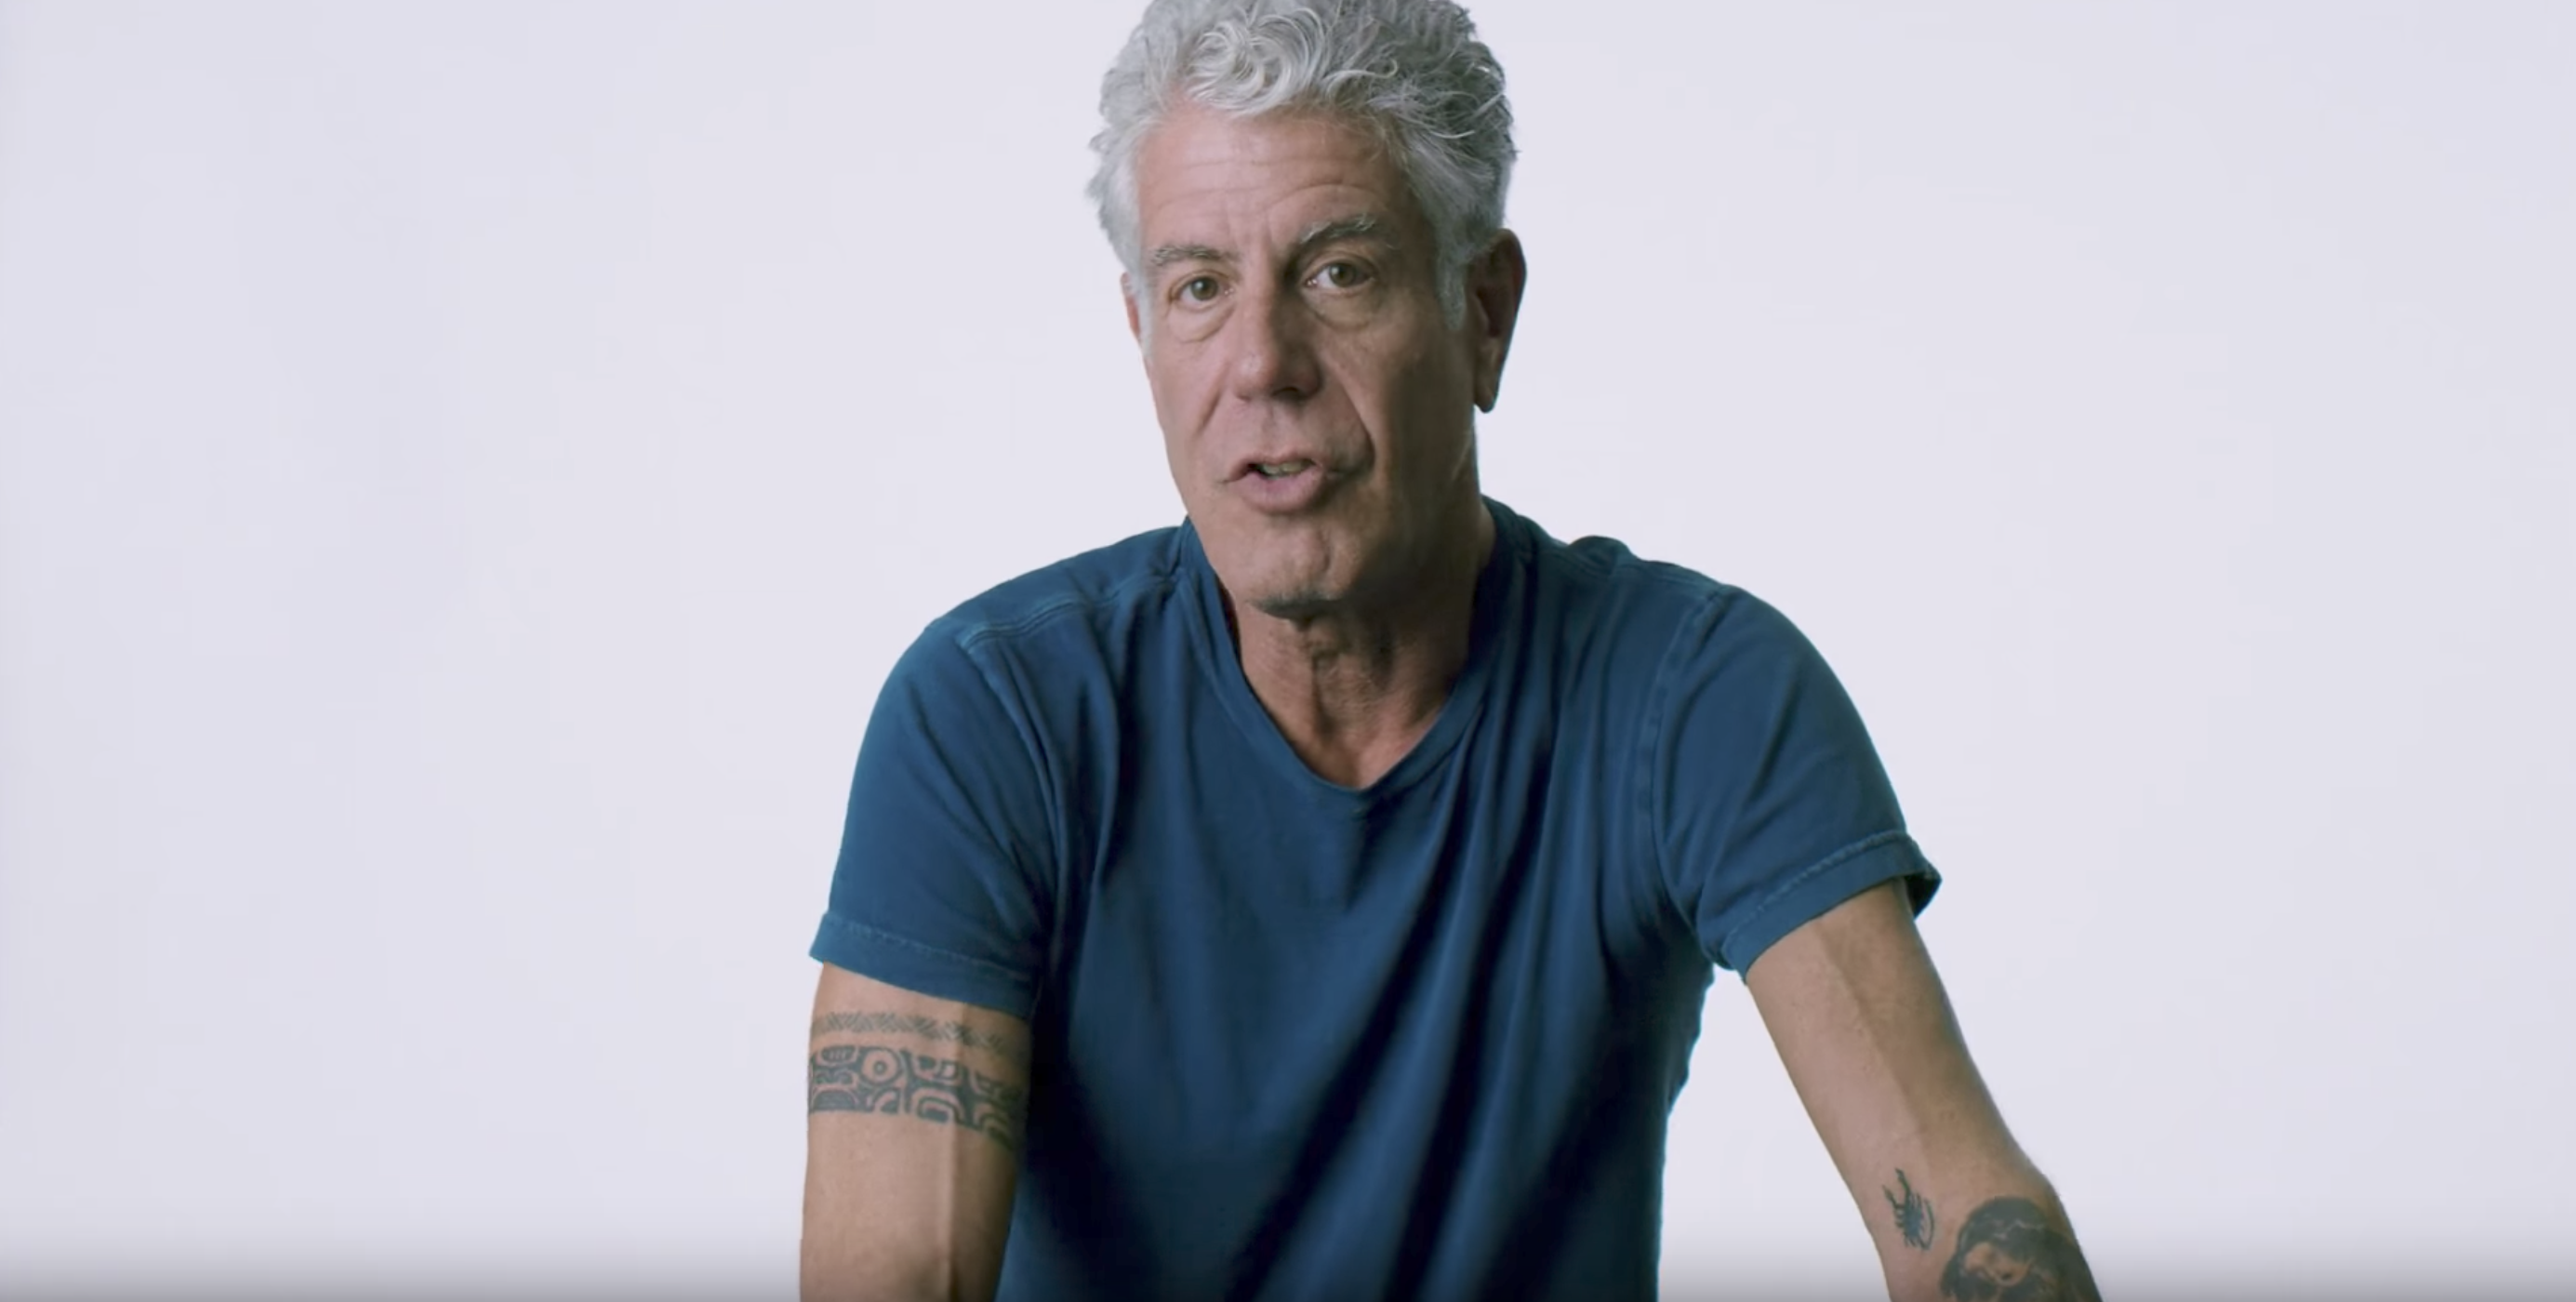 Anthony Bourdain in new documentary, Wasted! The Story of Food Waste.